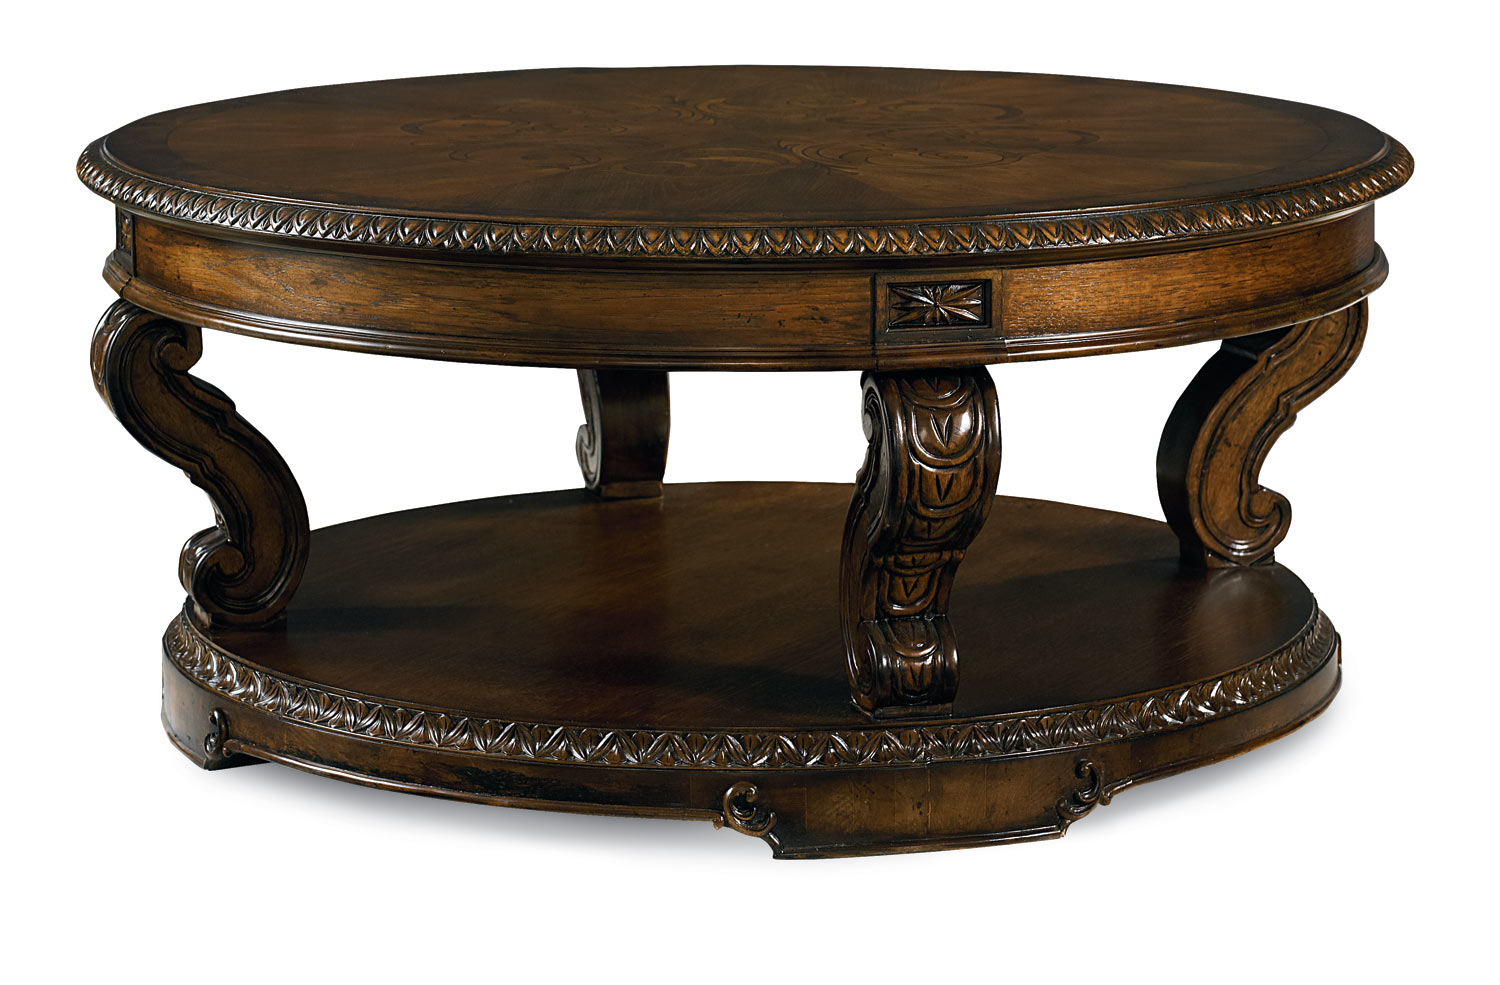 Legacy Classic Pemberleigh Round Cocktail Table - Brandy/Burnished Edges